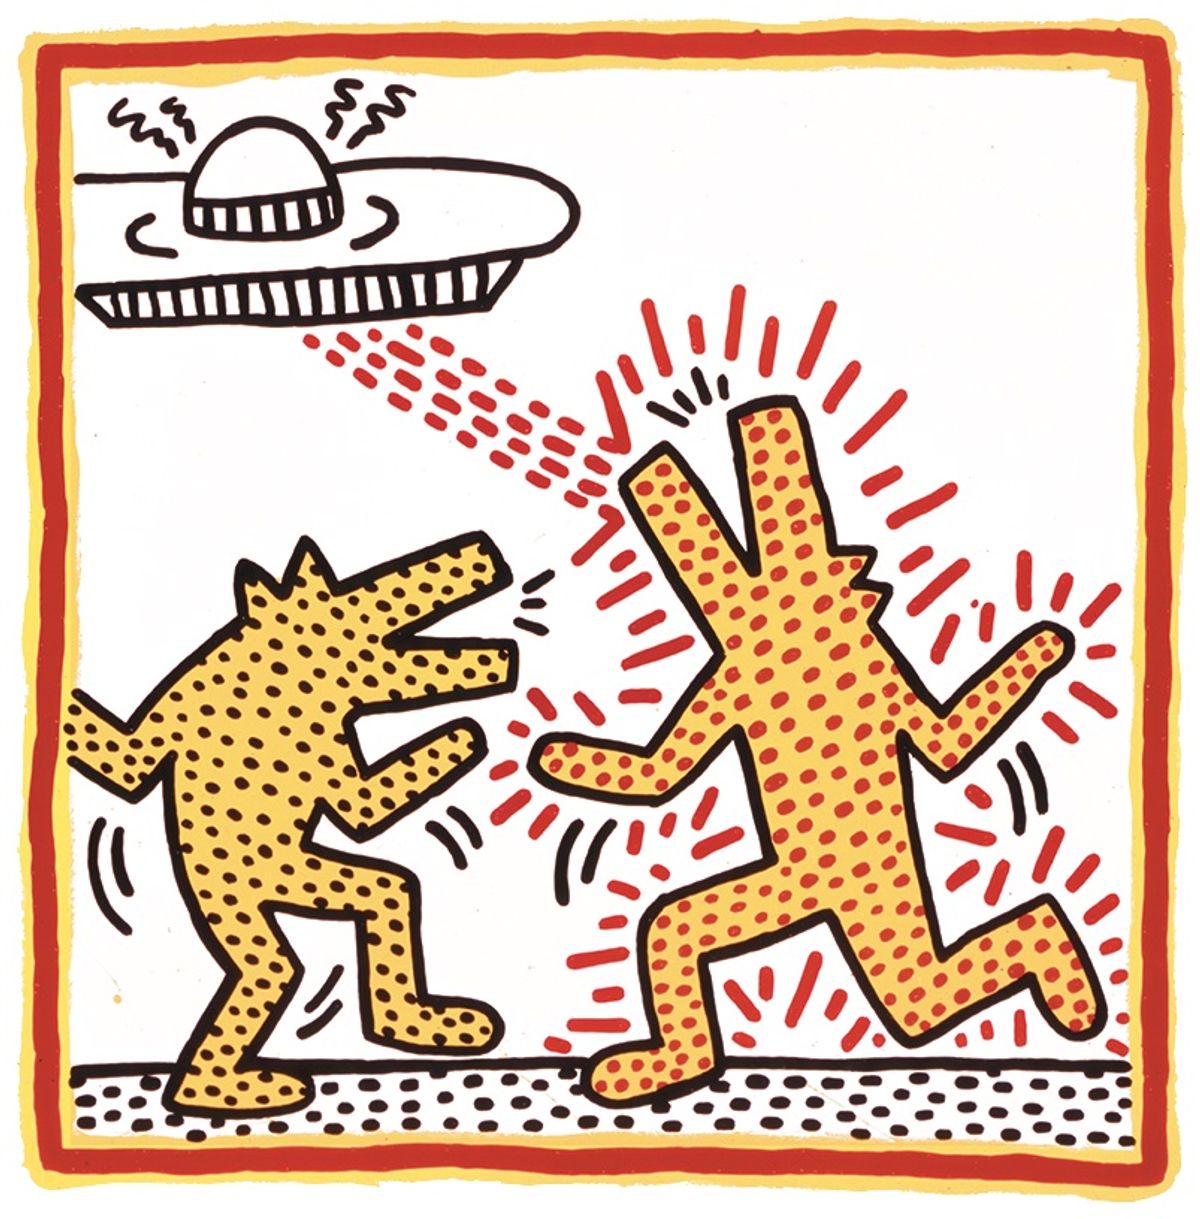 Haring’s signature playful style, as in Untitled (1982), was likely inspired by his father, an amateur cartoonist
Photo: Douglas M. Parker Studio, © Keith Haring Foundation